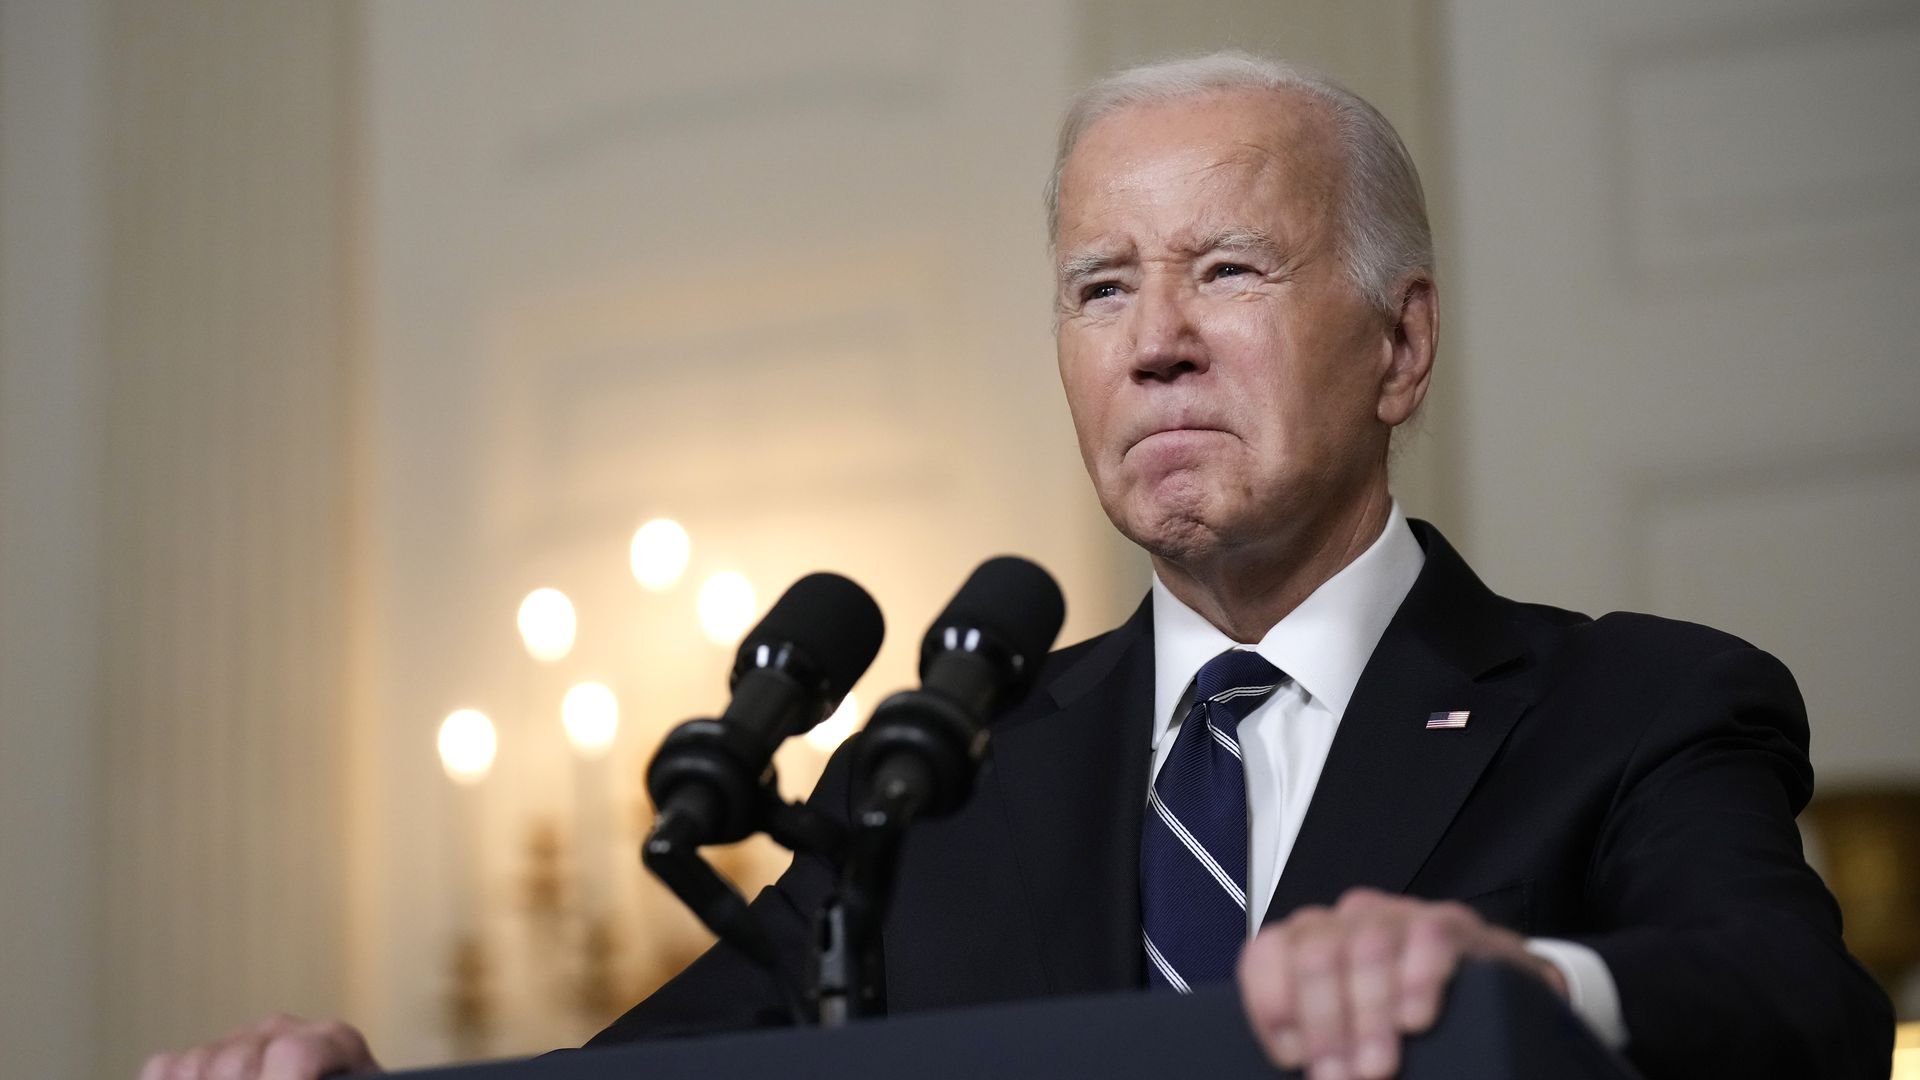 Biden's "crystal clear" condemnation of Hamas hailed by Israel